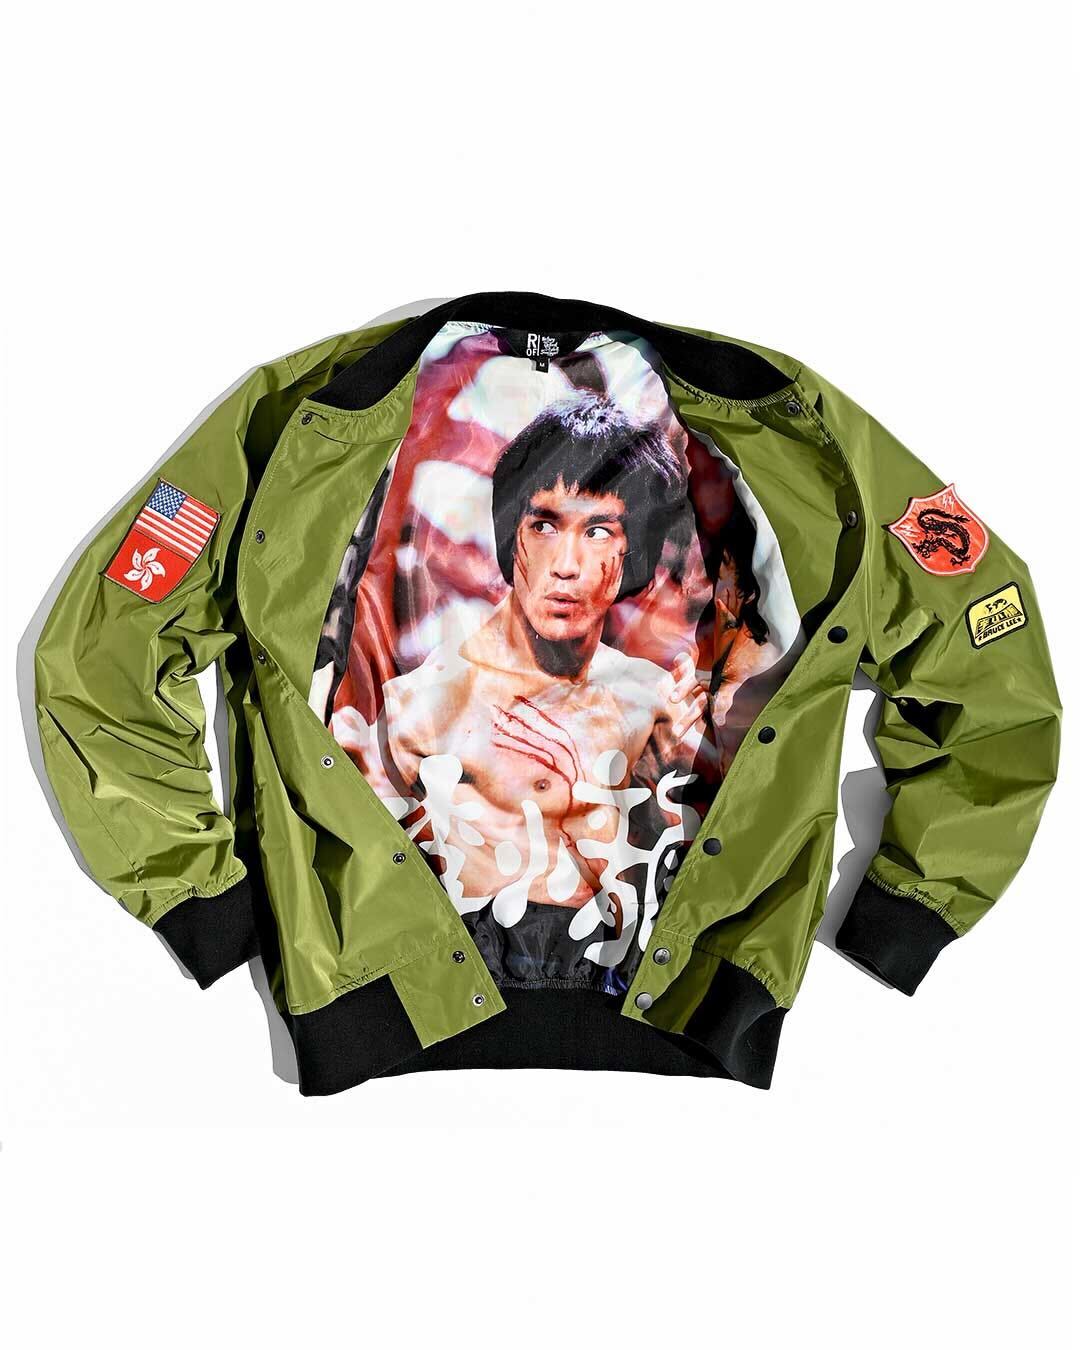 Bruce Lee Dragon Stadium Jacket - Roots of Fight Canada